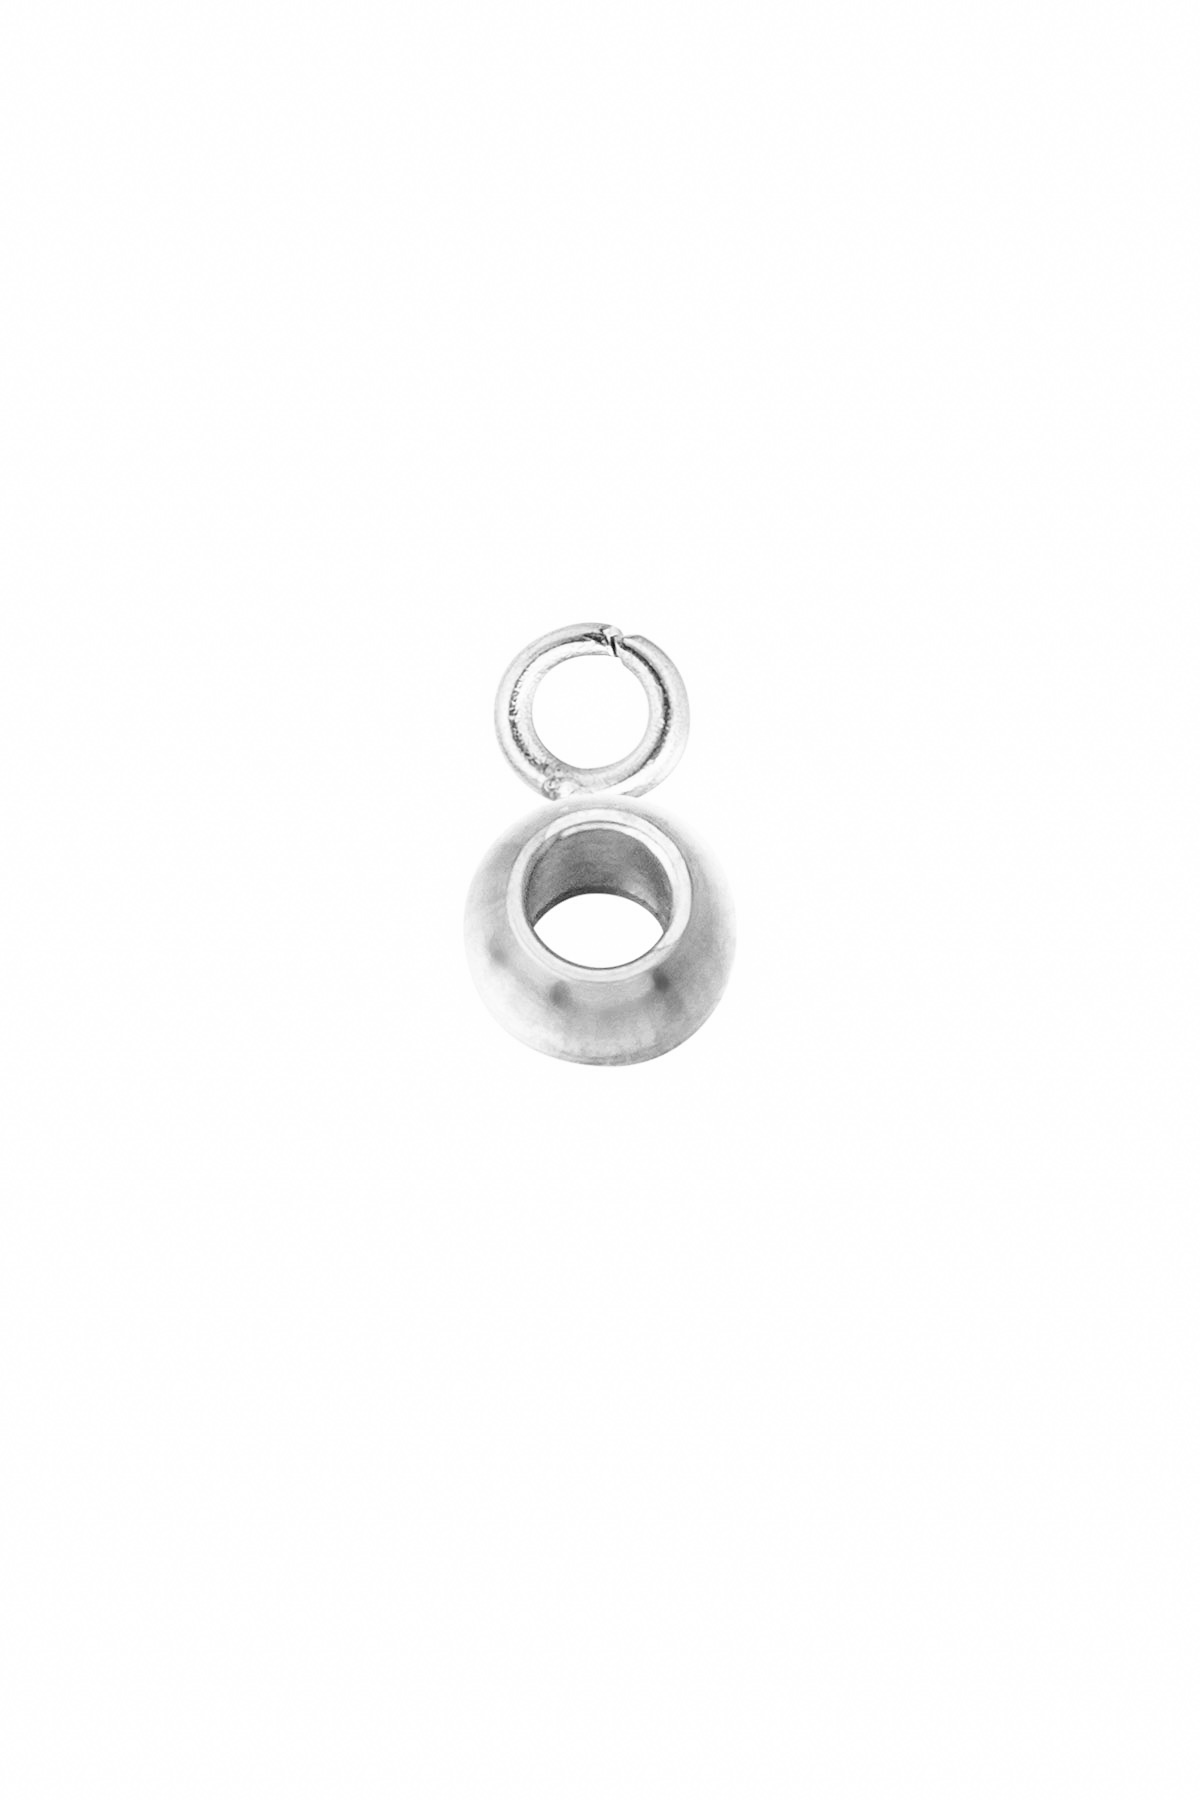 Jewelery part for charms - silver 